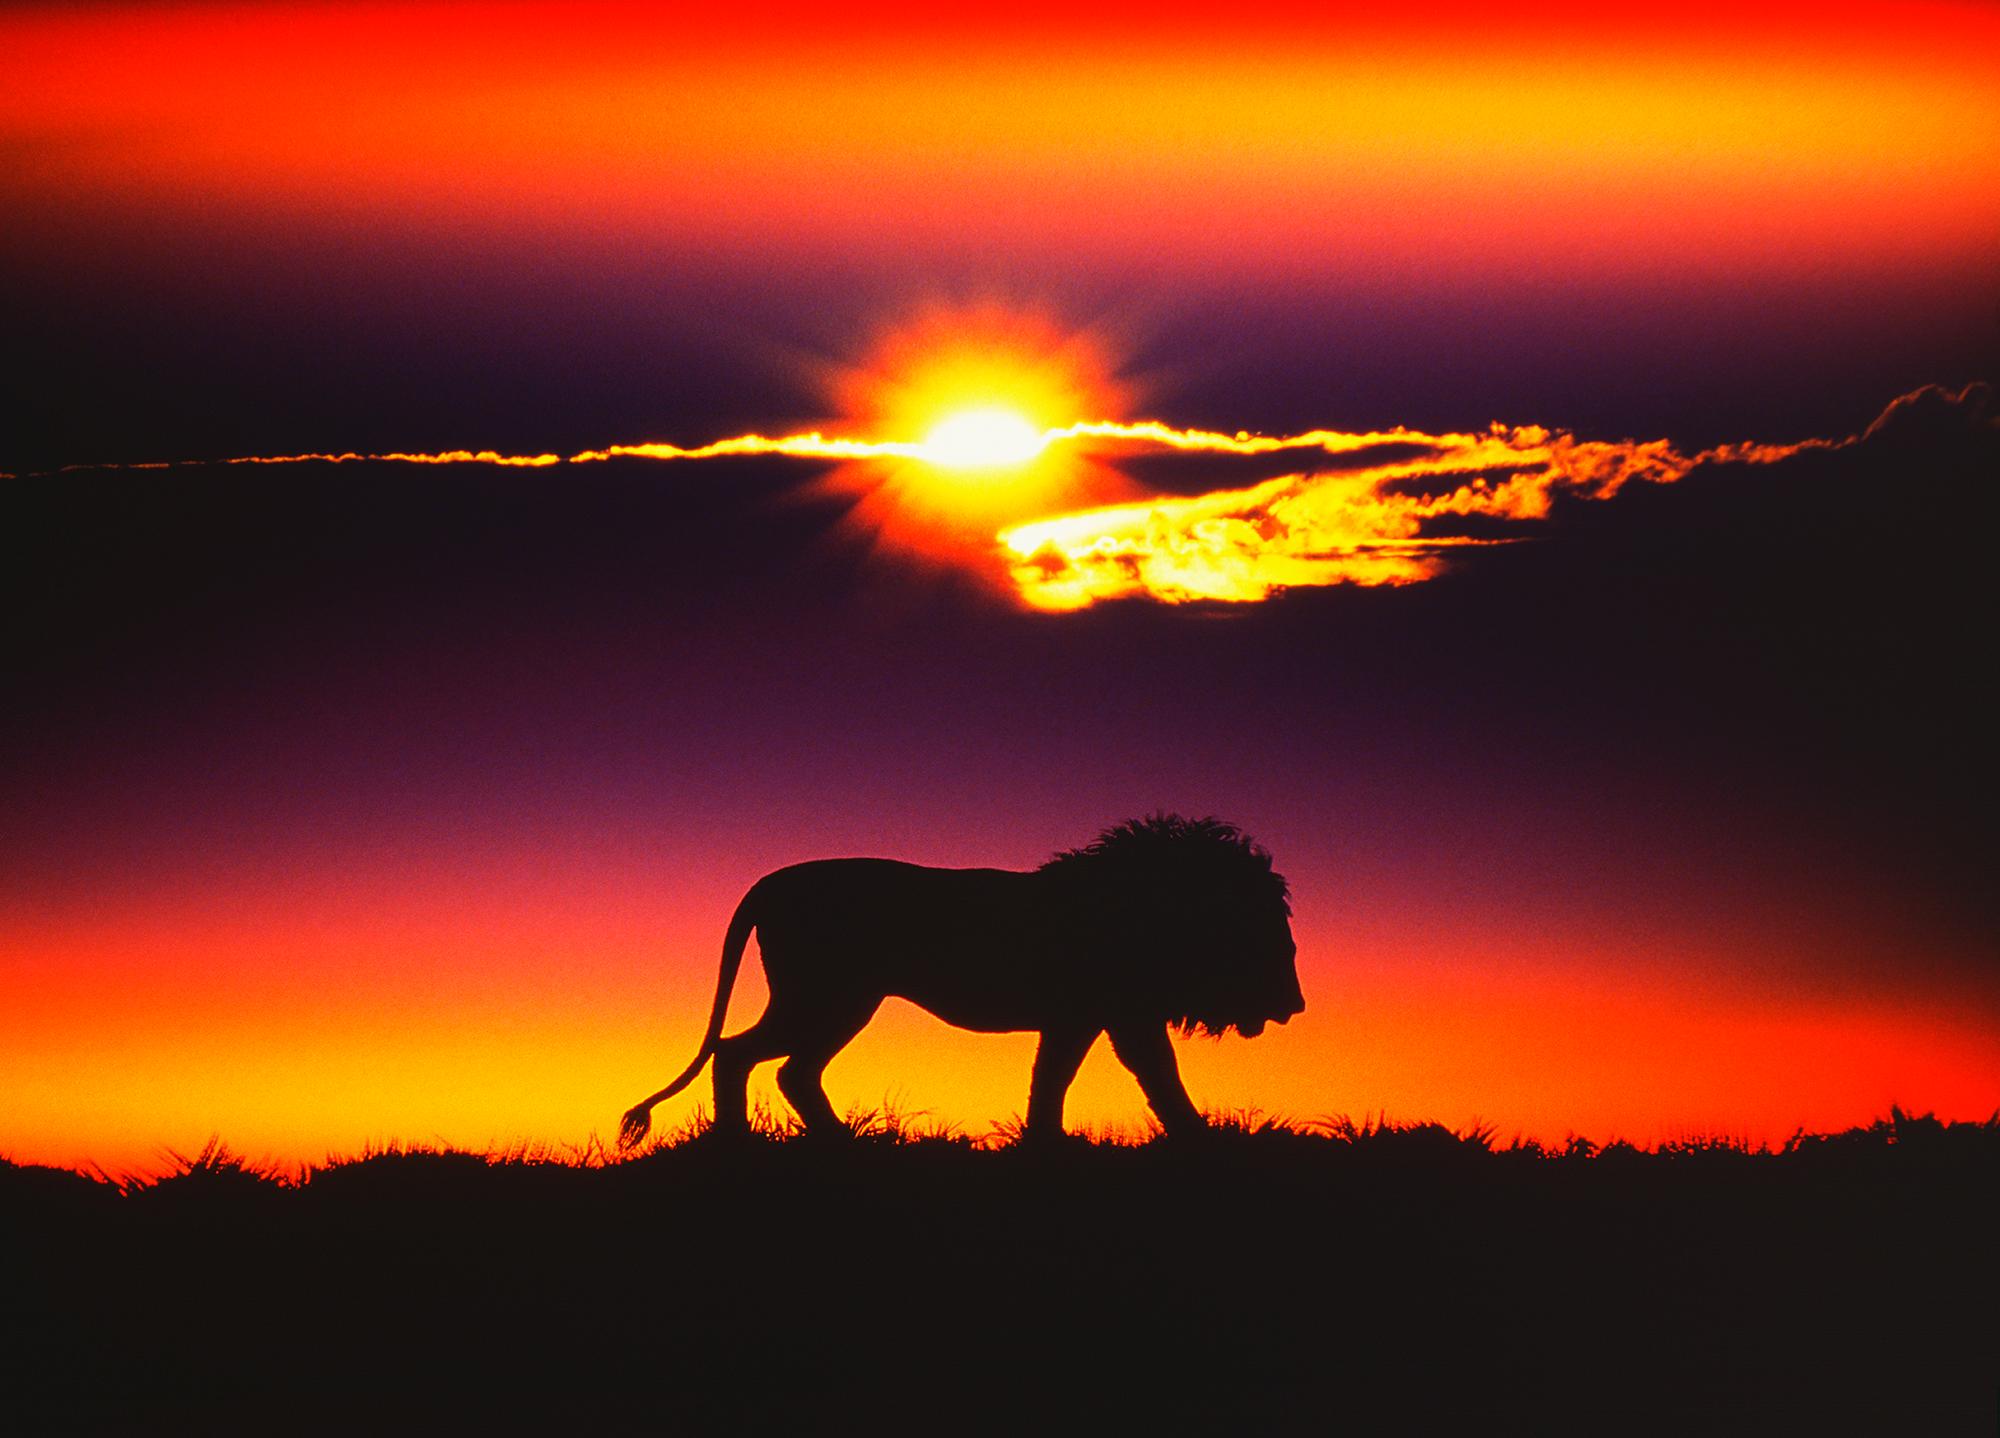 Noble Lion at Sunset